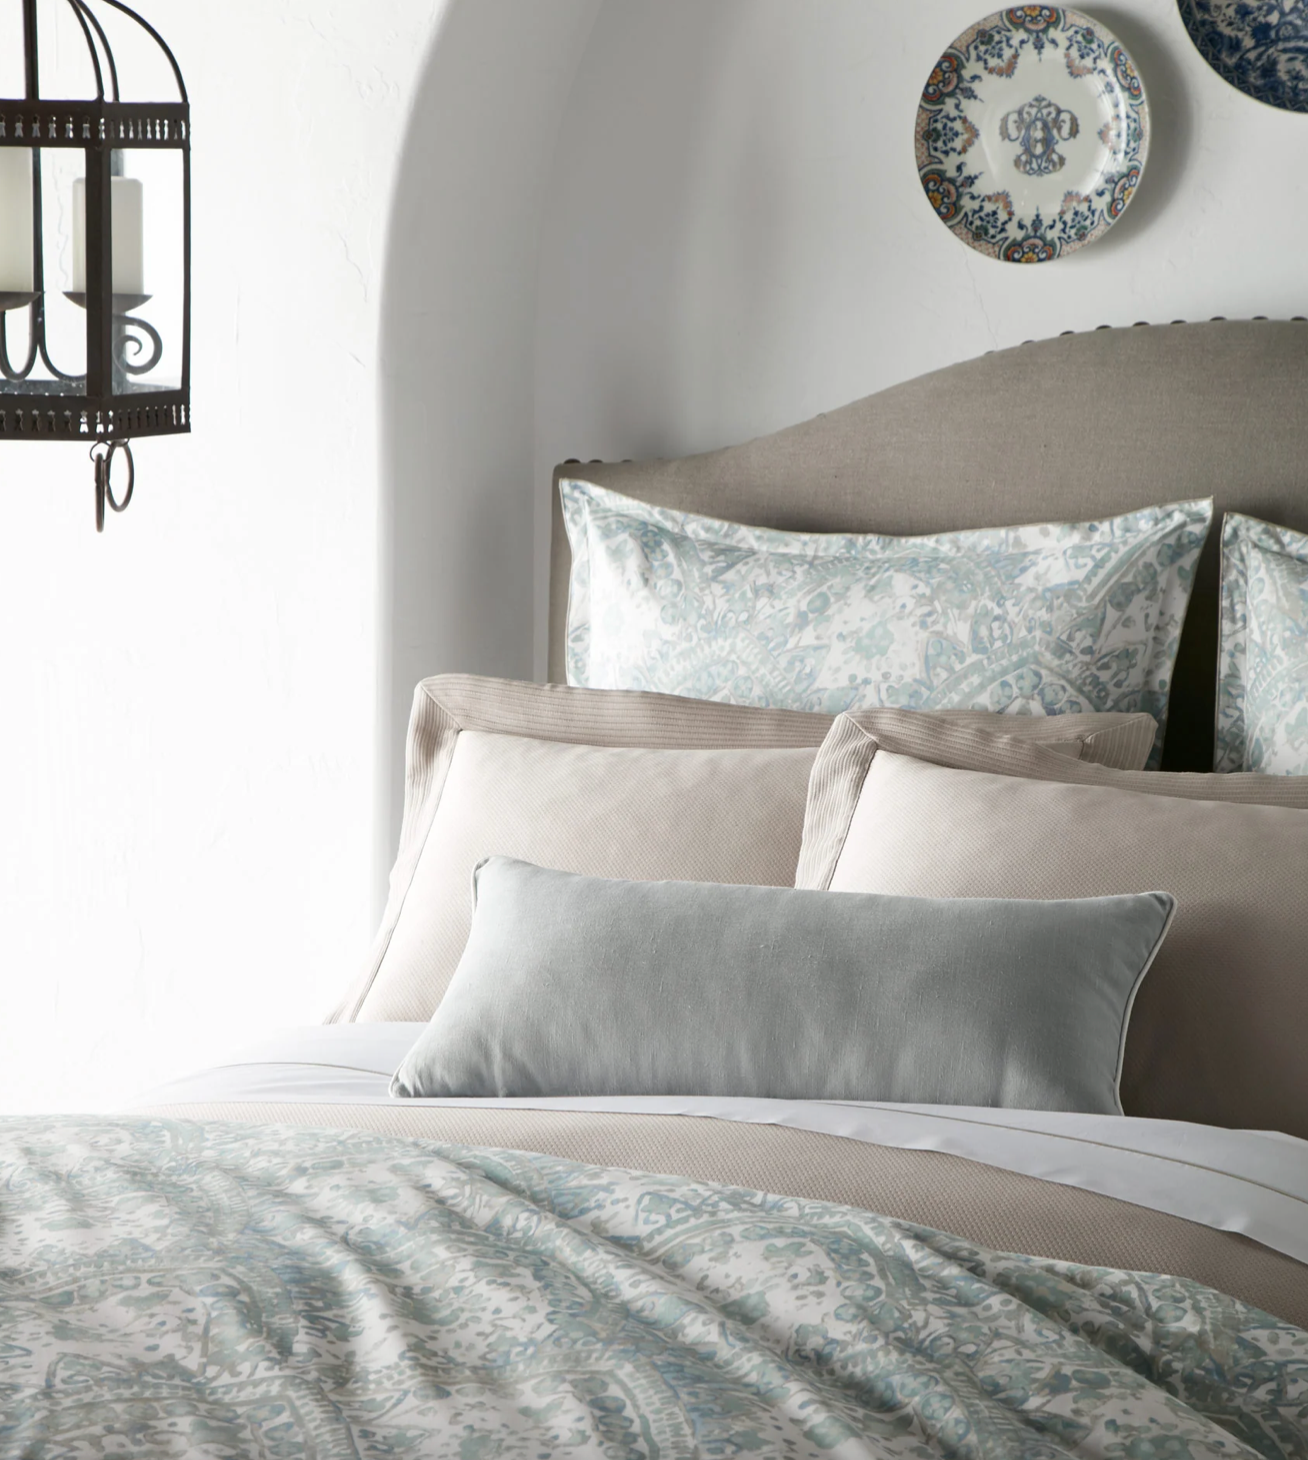 Seville cotton percale duvet cover by Peacock Alley